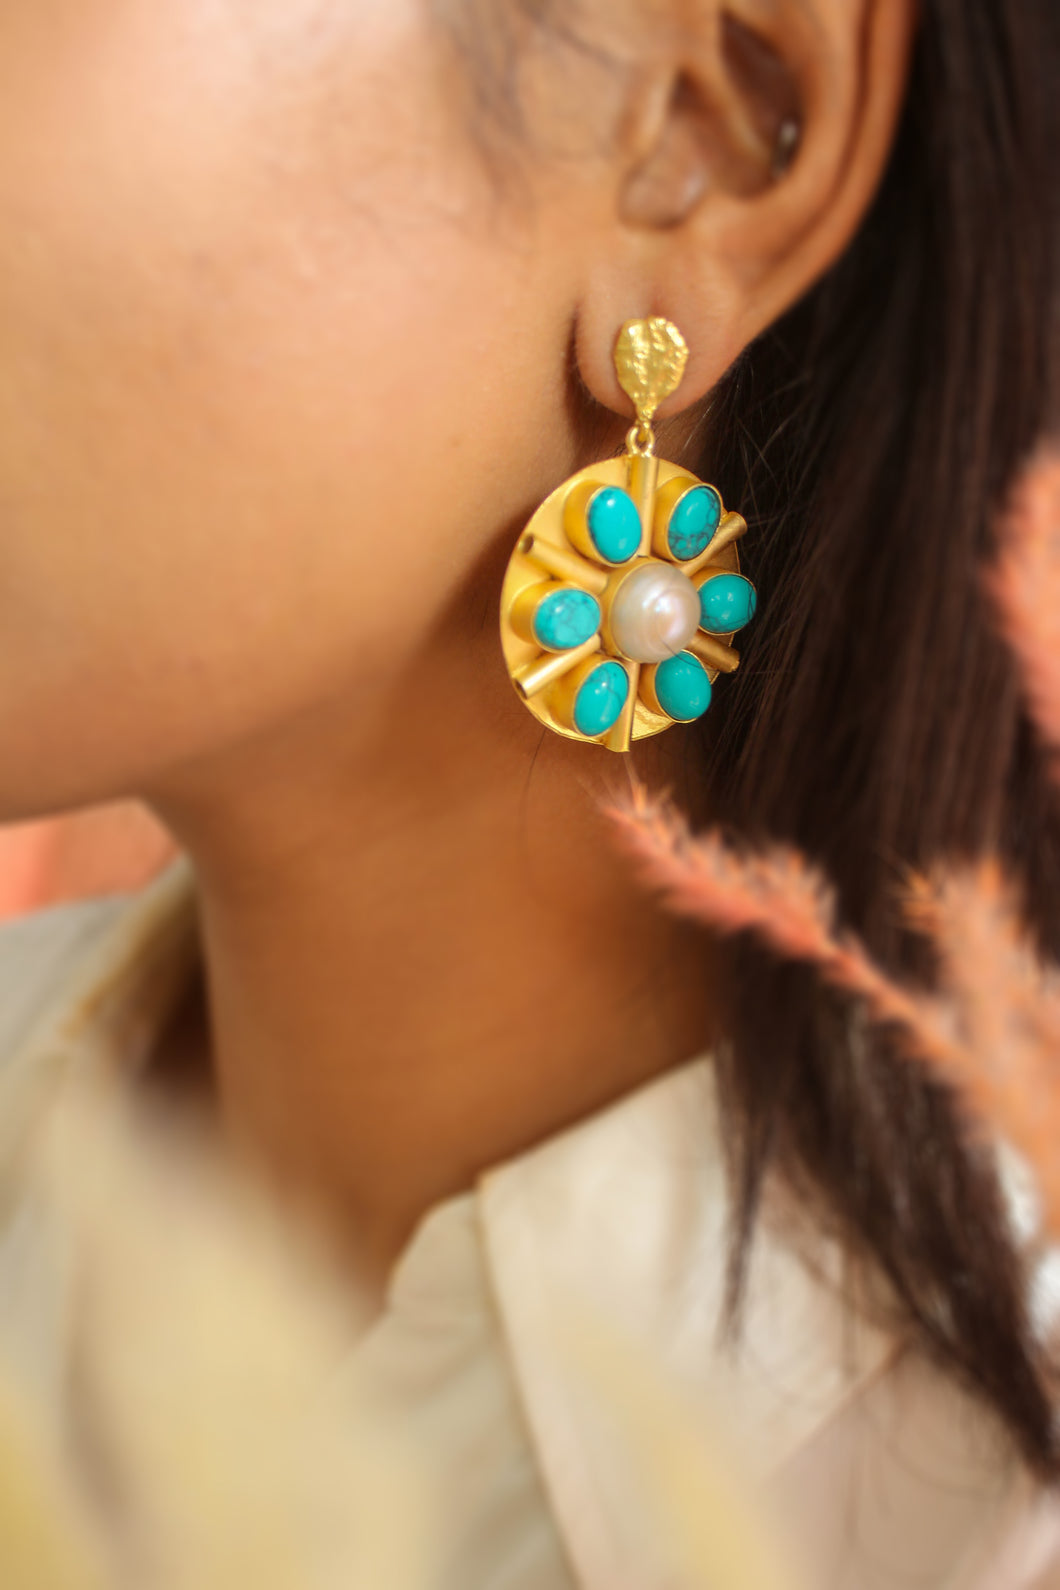 The Teal & Gold Earrings